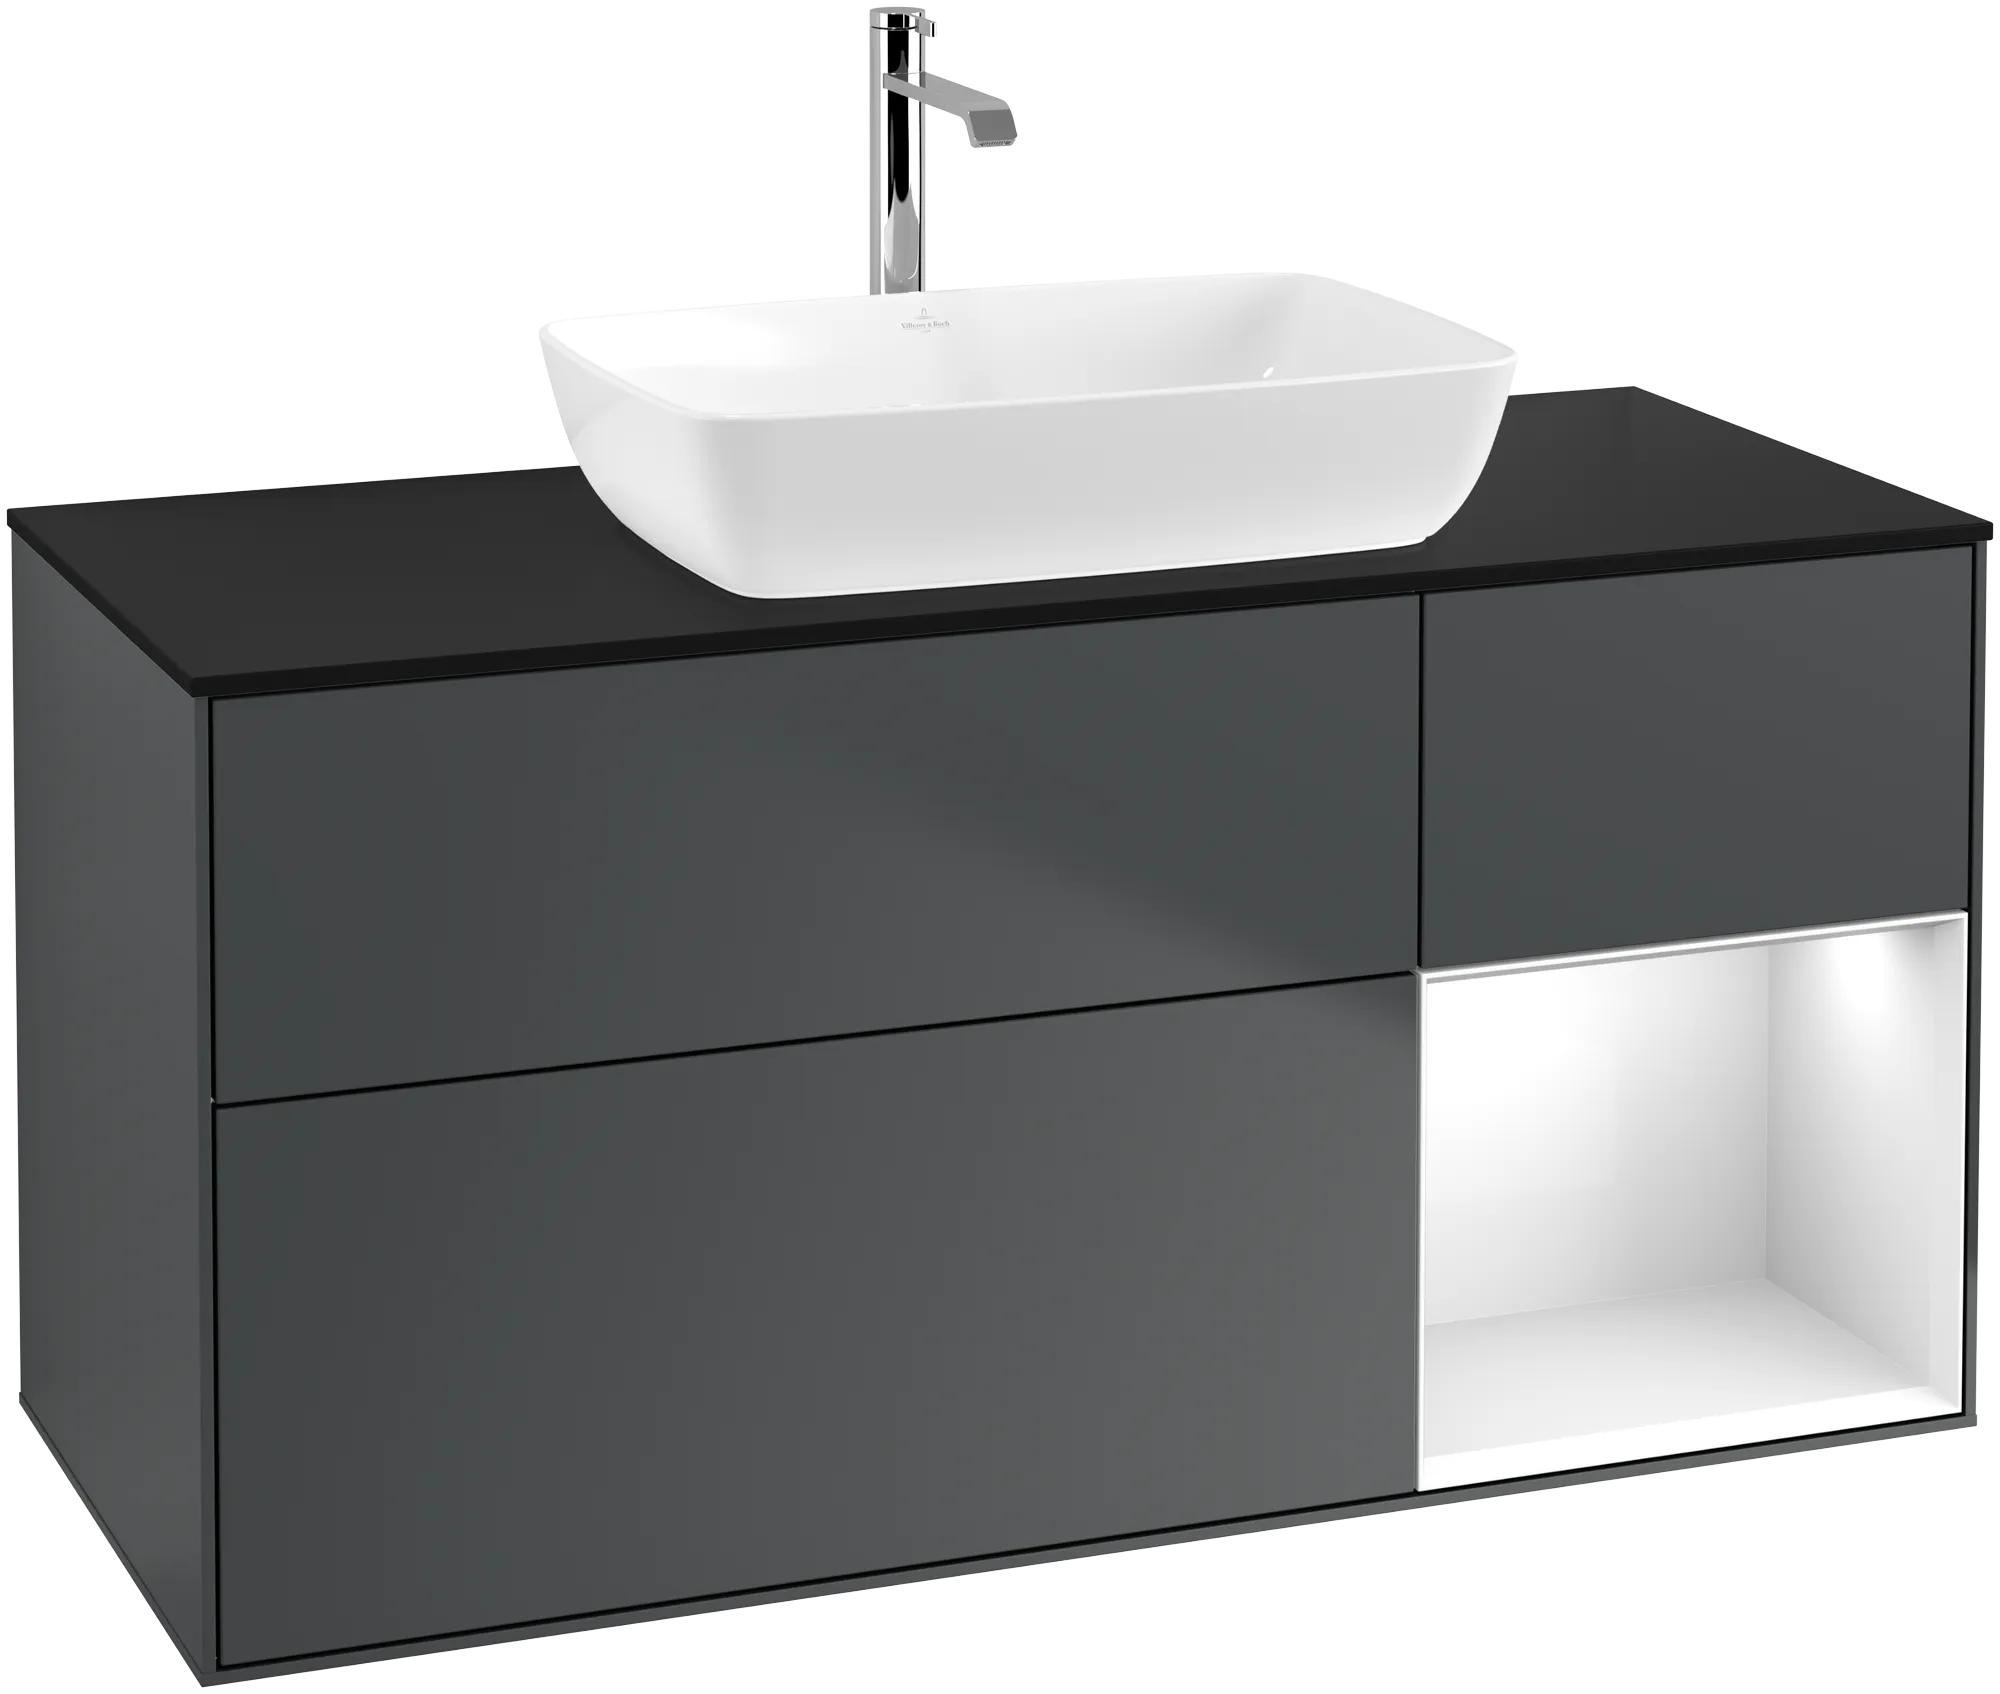 Obrázek VILLEROY BOCH Finion Vanity unit, with lighting, 3 pull-out compartments, 1200 x 603 x 501 mm, Midnight Blue Matt Lacquer / Glossy White Lacquer / Glass Black Matt #G832GFHG